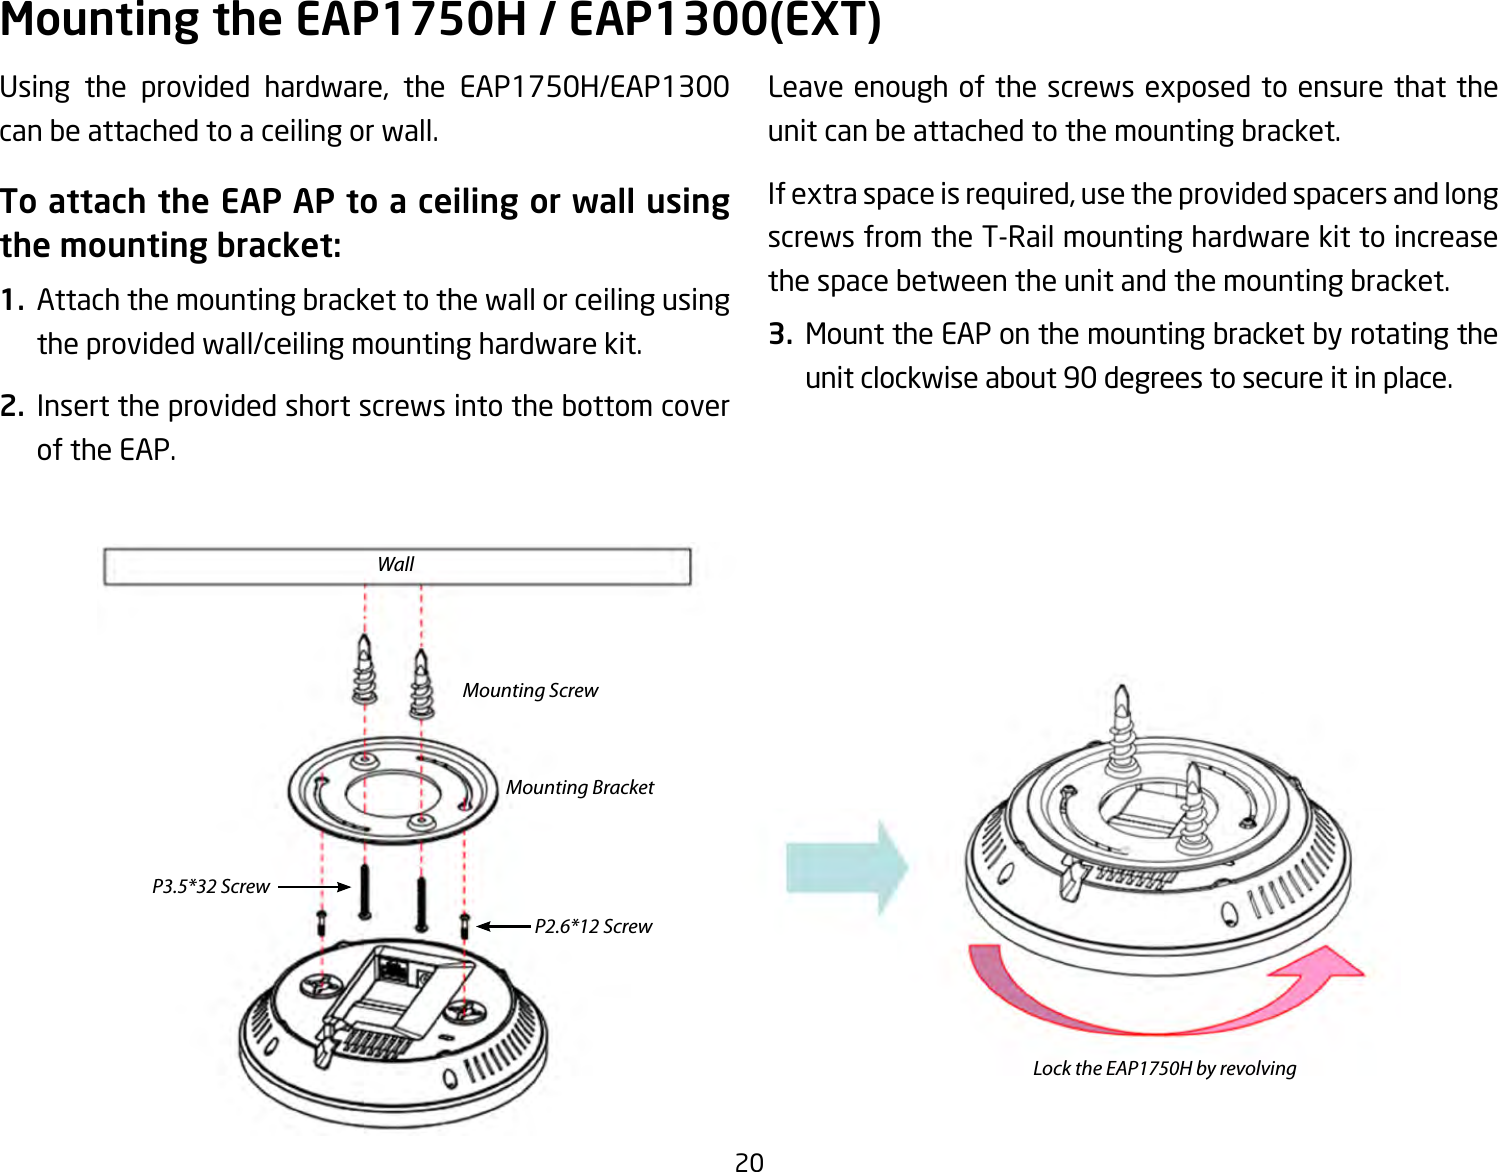 20Using the provided hardware, the EAP1750H/EAP1300can be attached to a ceiling or wall.To attach the EAP AP to a ceiling or wall using the mounting bracket:1.  Attach the mounting bracket to the wall or ceiling using the provided wall/ceiling mounting hardware kit.2.  Insert the provided short screws into the bottom cover of the EAP.  Leaveenoughofthescrewsexposedtoensurethattheunit can be attached to the mounting bracket.Ifextraspaceisrequired,usetheprovidedspacersandlongscrews from the T-Rail mounting hardware kit to increase the space between the unit and the mounting bracket.3.  Mount the EAP on the mounting bracket by rotating the unitclockwiseabout90degreestosecureitinplace.Mounting the EAP1750H / EAP1300(EXT)WallMounting ScrewLock the EAP1750H by revolvingMounting BracketP2.6*12 ScrewP3.5*32 Screw